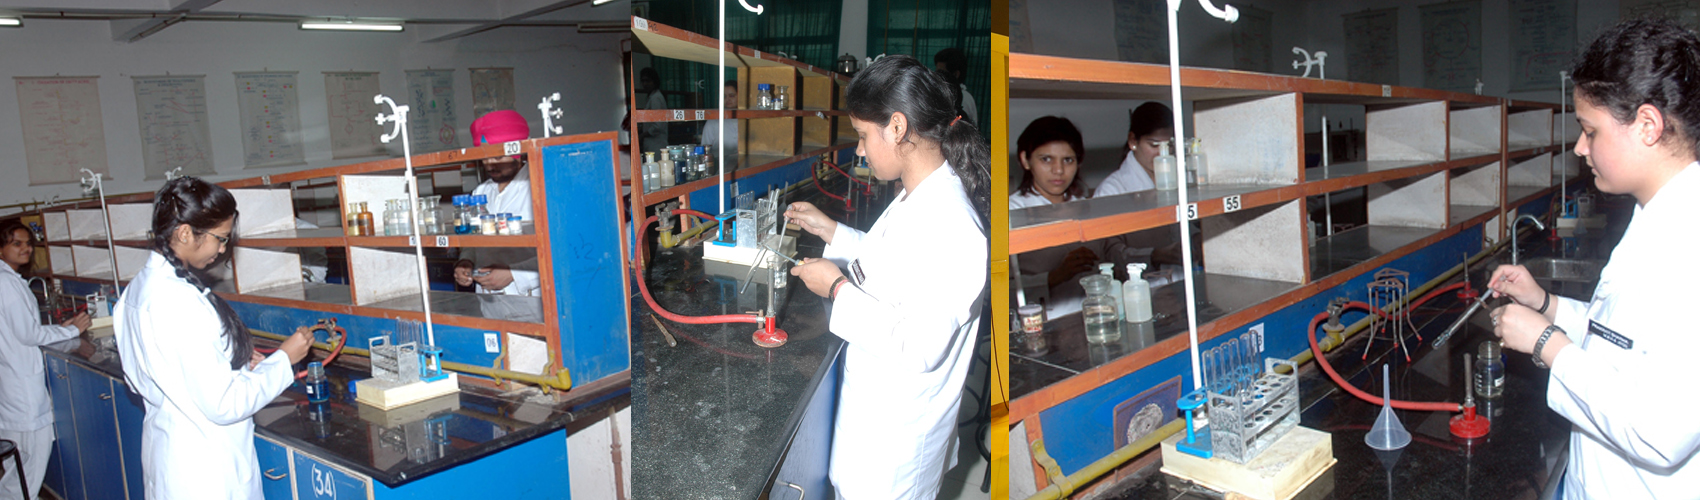 MEDICAL COLLEGES FOR BIO-CHEMISTRY